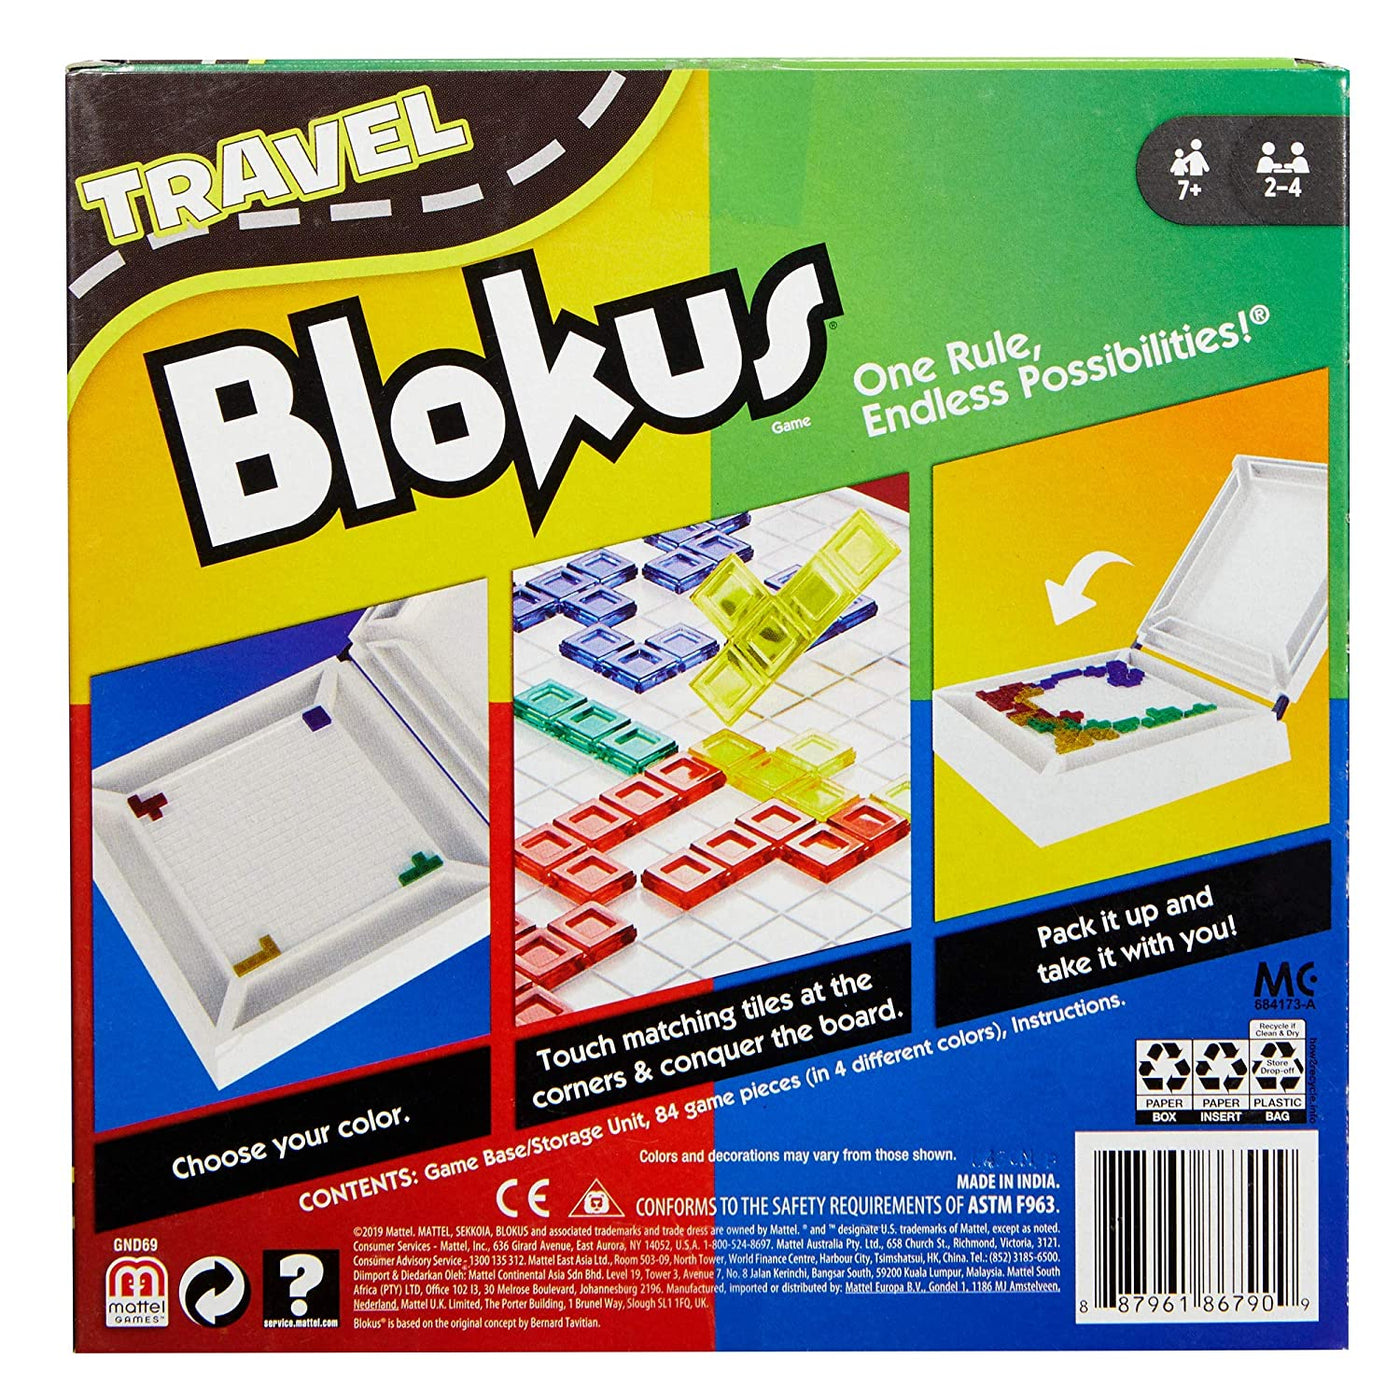 Blokus - Travel Game ( One Rule, Endless Possibilities!) | Mattel Games